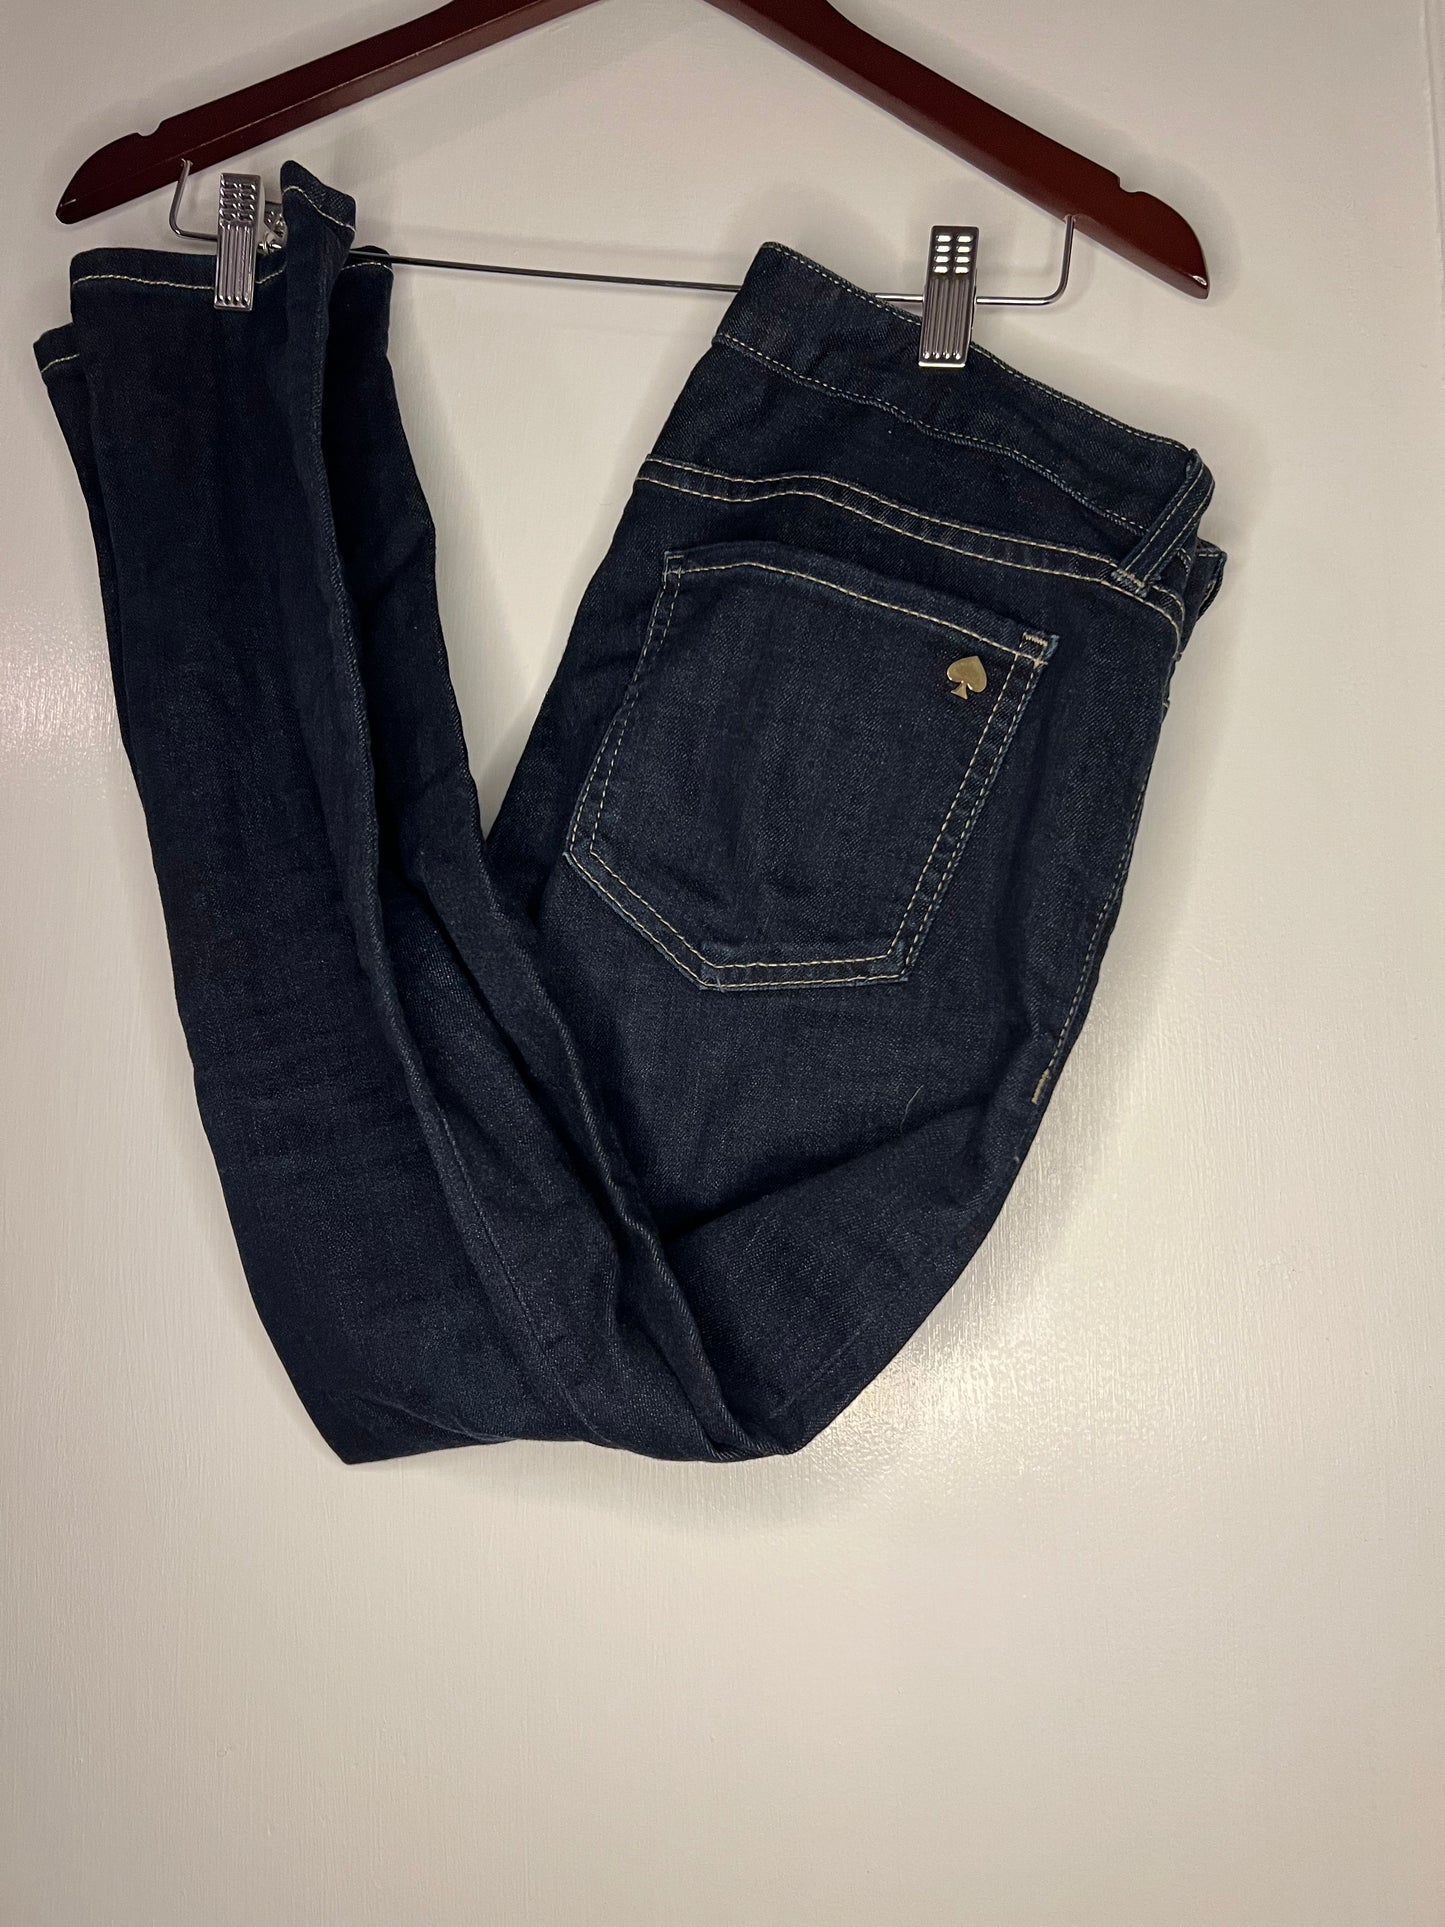 Kate Spade Straight Leg Jeans Size 27 PPU 45208 or SCO Spring Sale